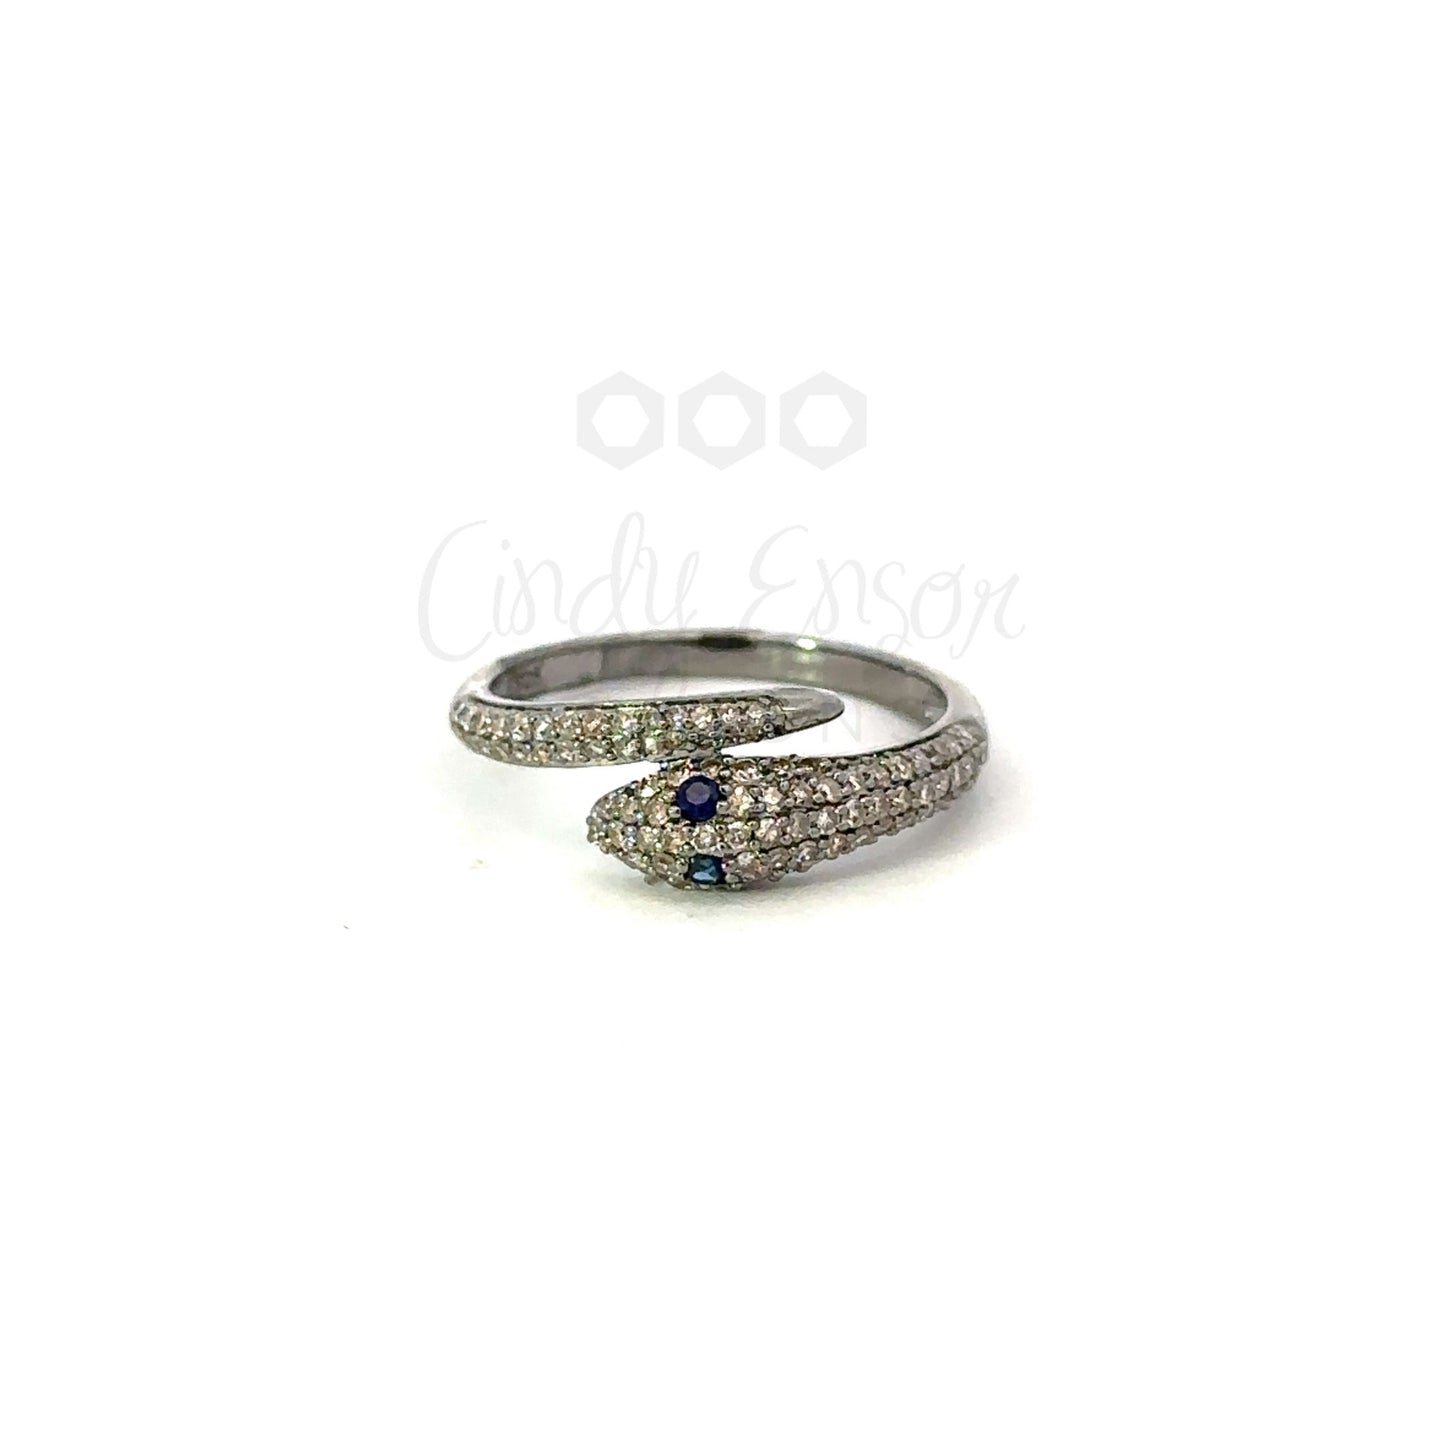 Overlapping Pave Diamond Snake Ring with Colored Gemstone Eyes